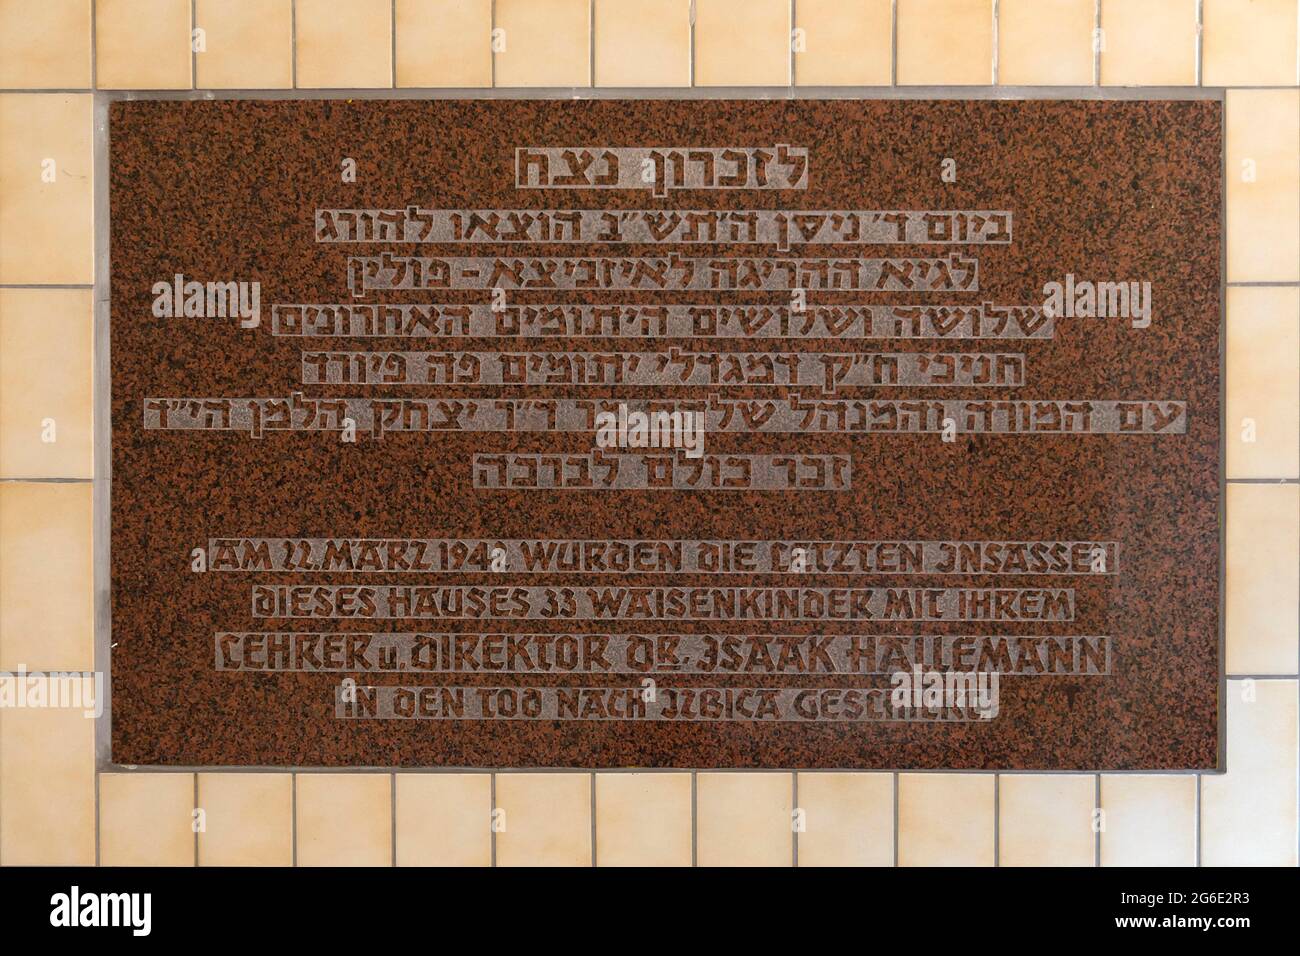 Memorial plaque to the teachers and orphans deported by the Nazi regime in 1942, synagogue, Fuerth, Middle Franconia, Bavaria, Germany Stock Photo